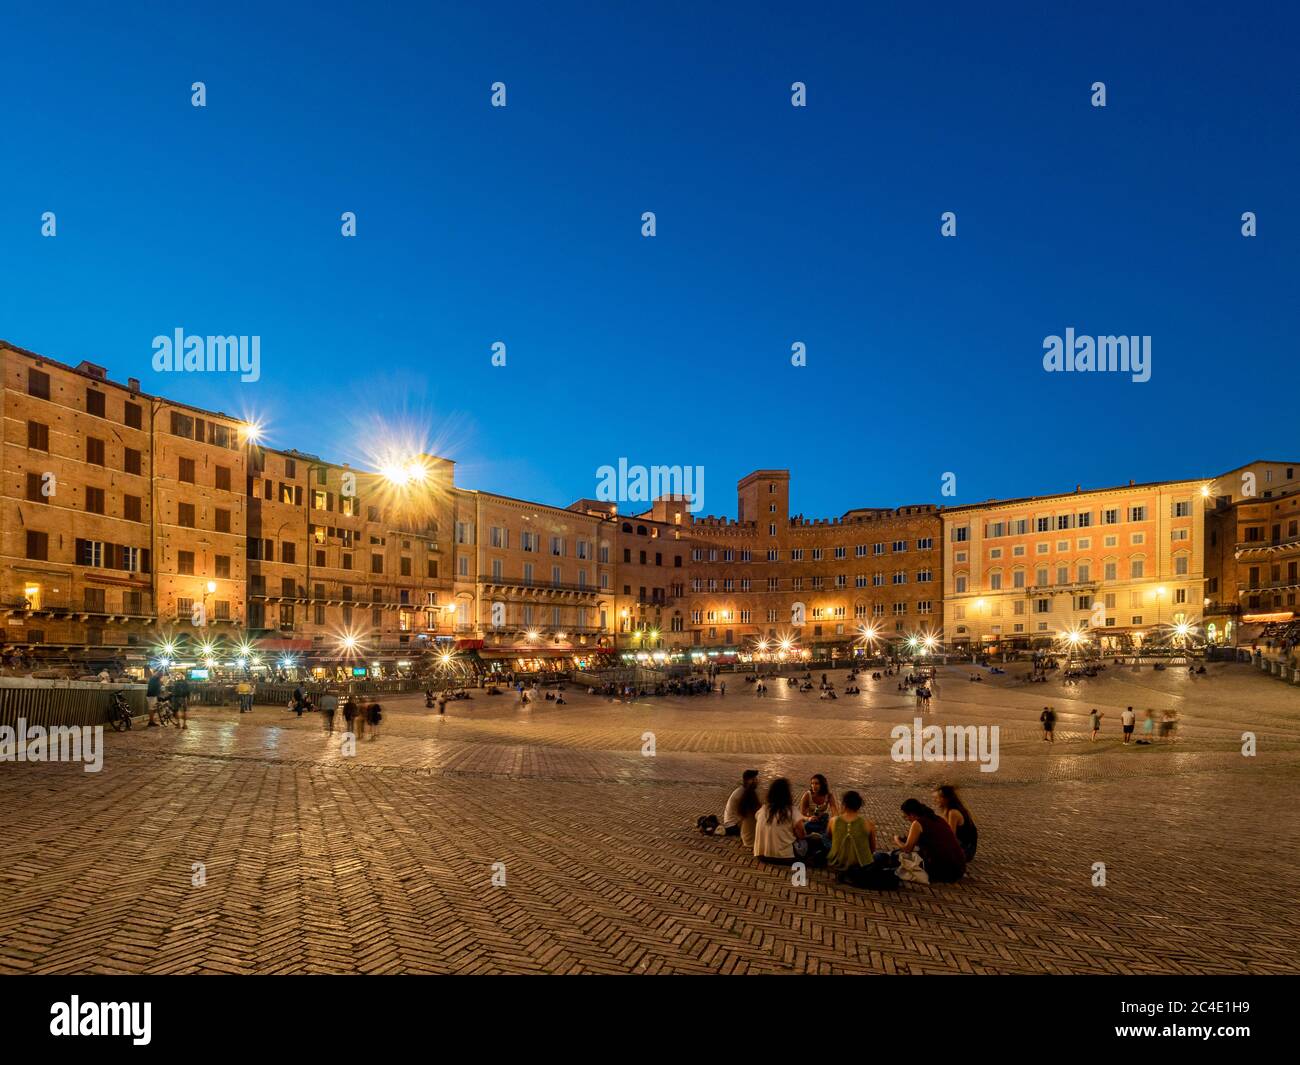 Night time shot of tourists in the Piazza del Campo, Siena. Italy. Stock Photo